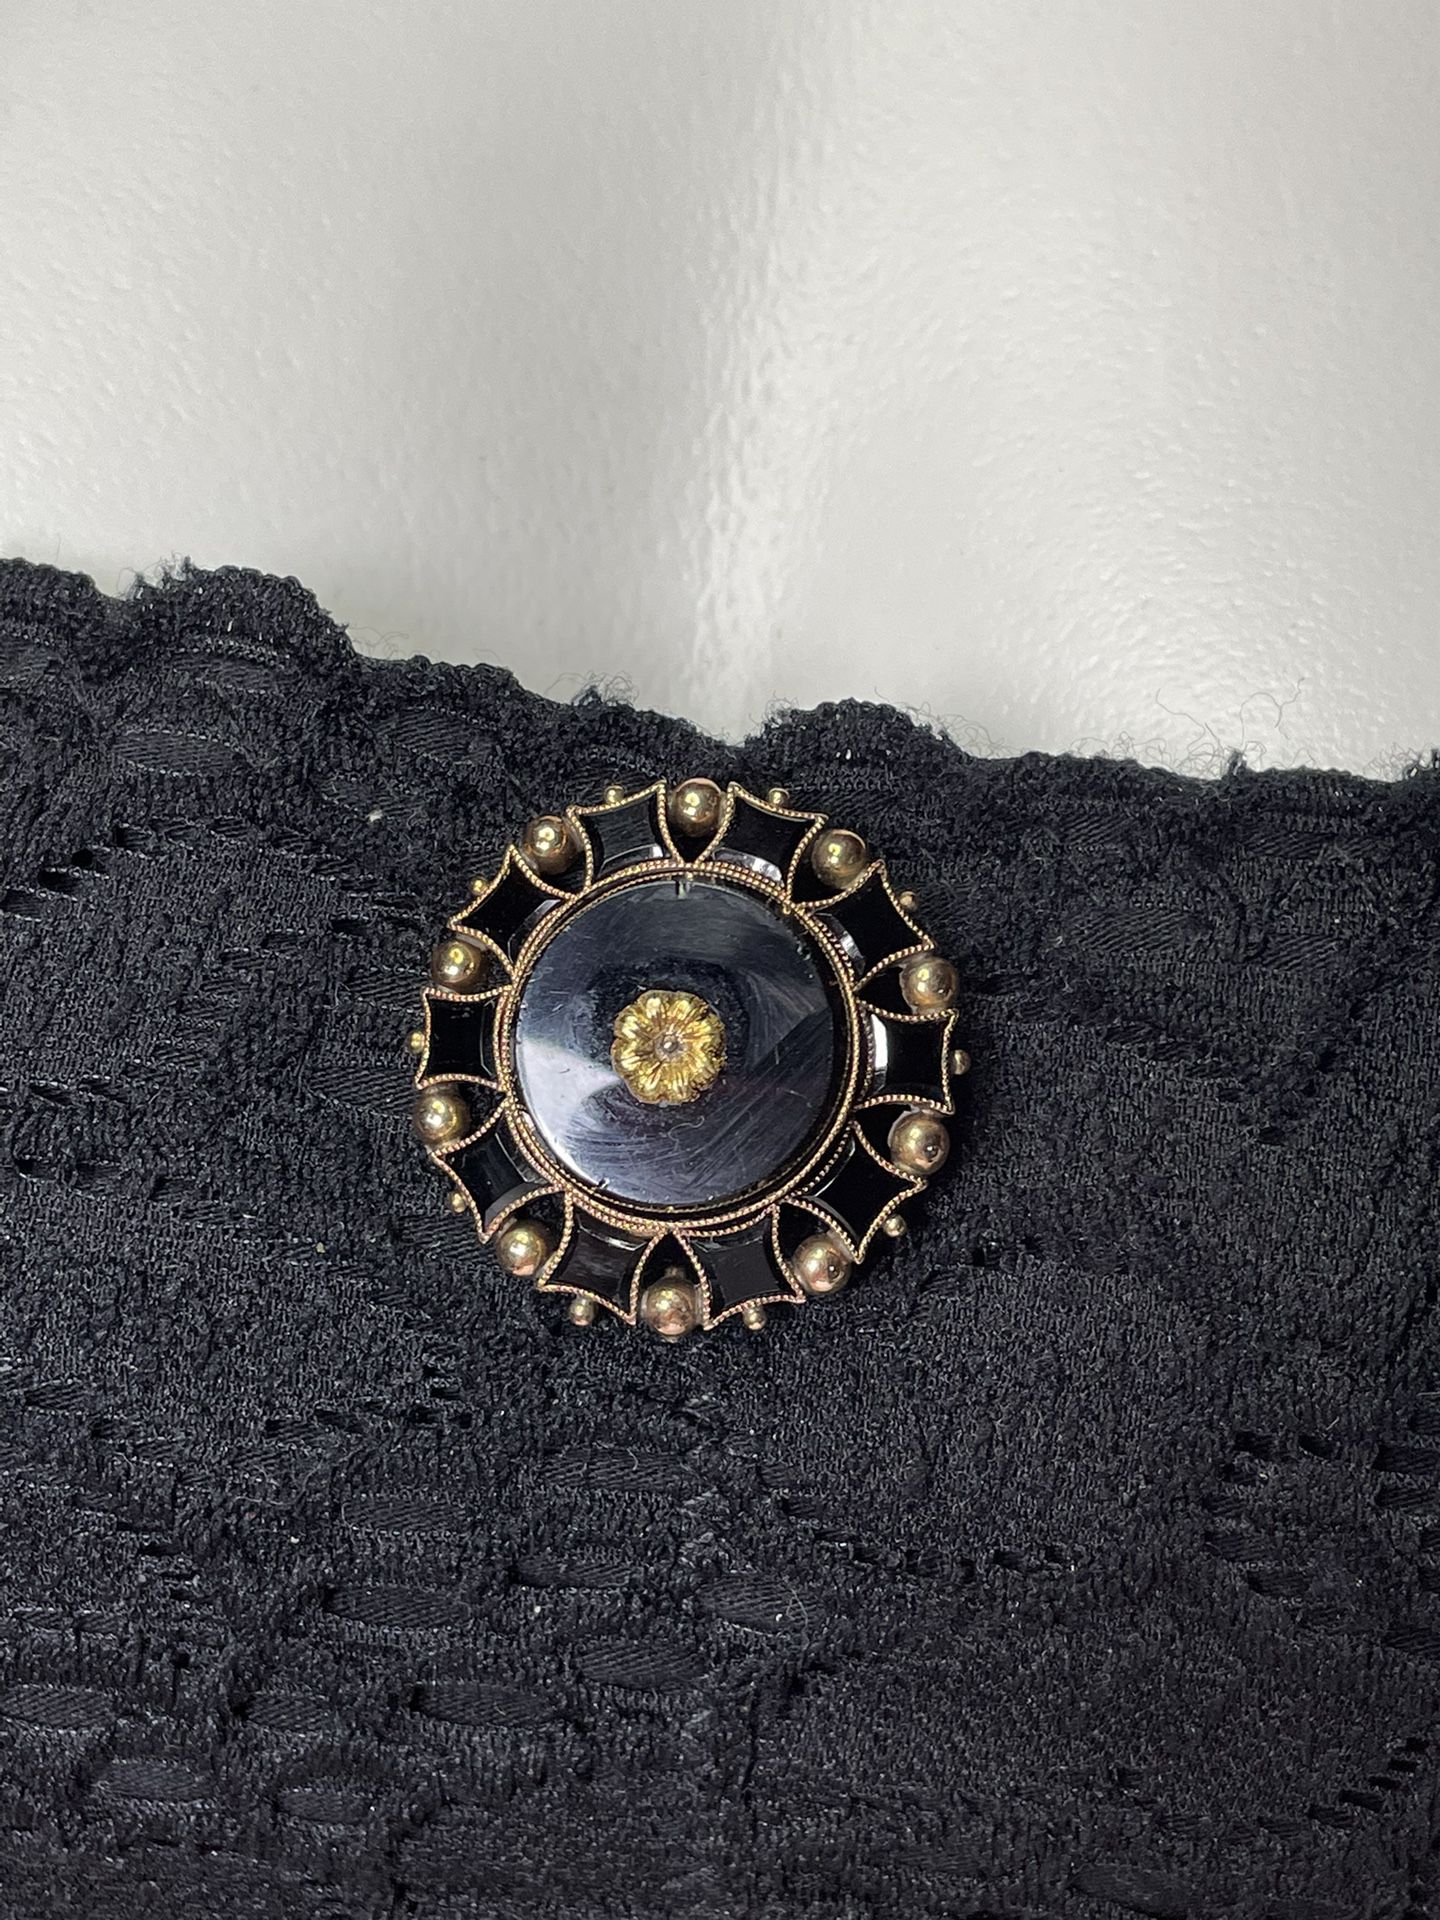 10KT Yellow Gold Victorian Onyx Mourning Brooch / Pin / Pendant